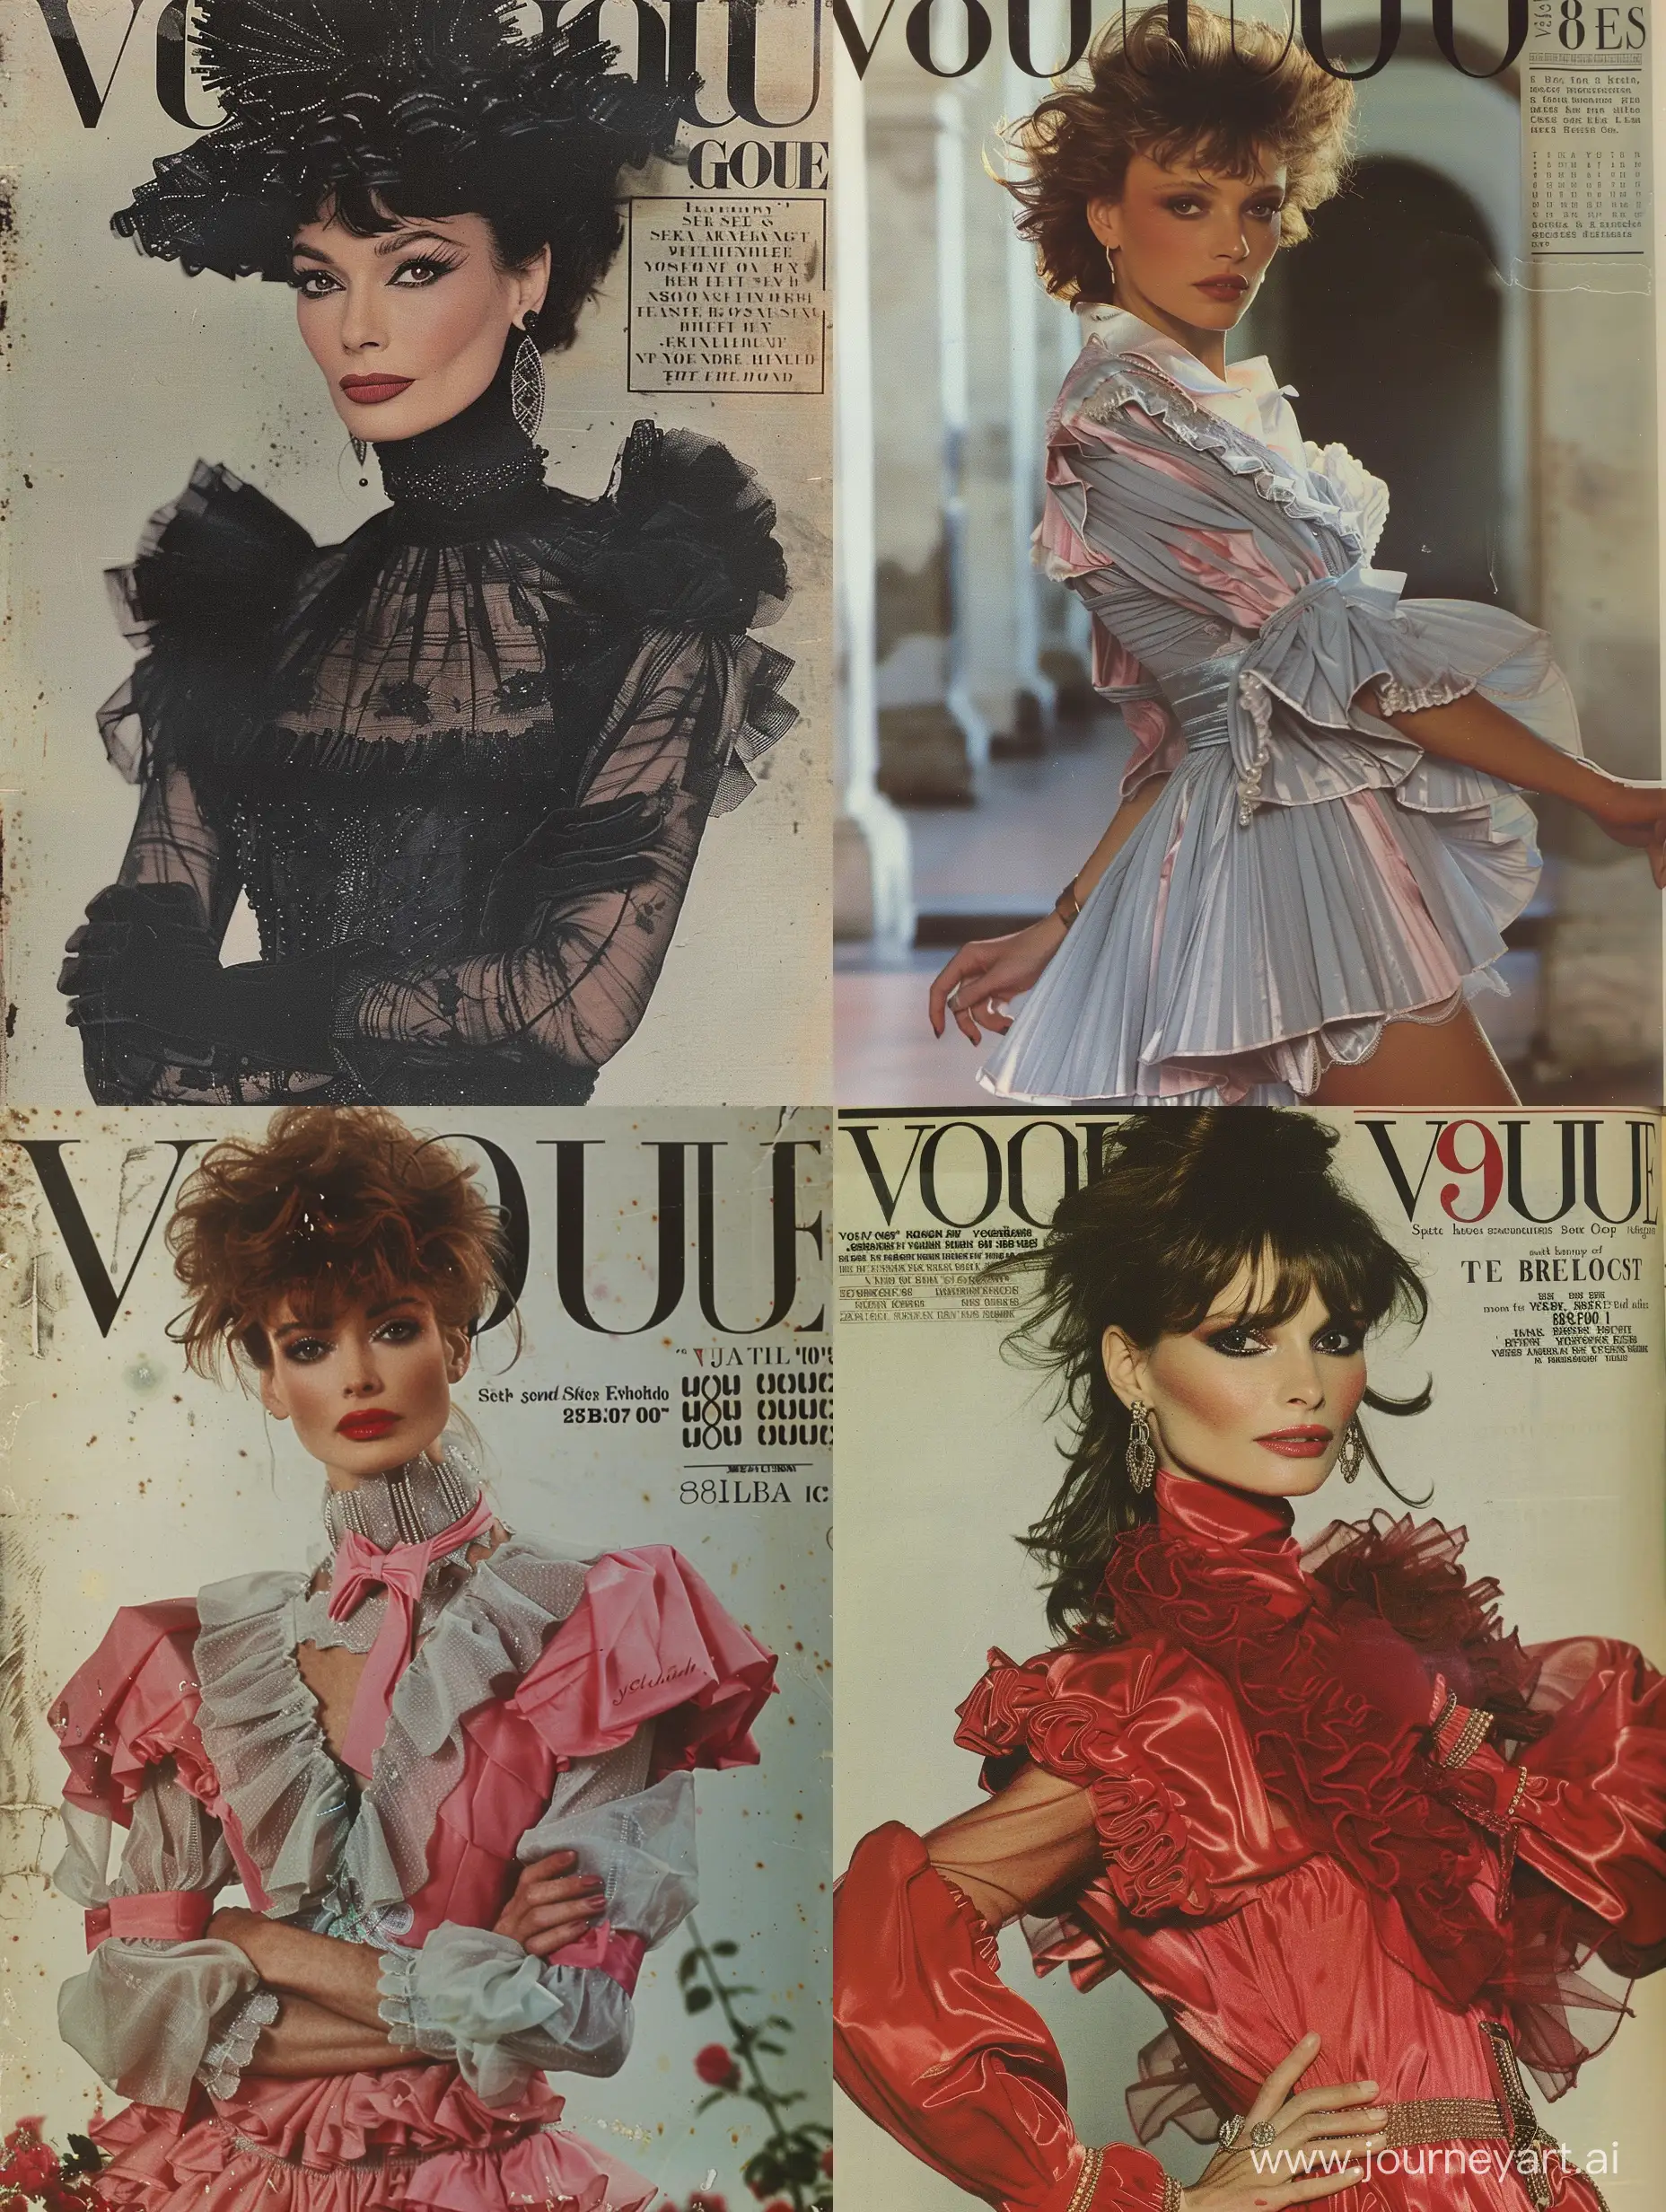 The sexiest woman of the 80s in Italy, old magazine effect, magazine cover, 80s, 80s style, retro, indie, vintage, classic, nostalgic, old, trend, realistic, photorealistic, Vogue ballroom outfit, look from Vogue, detailed